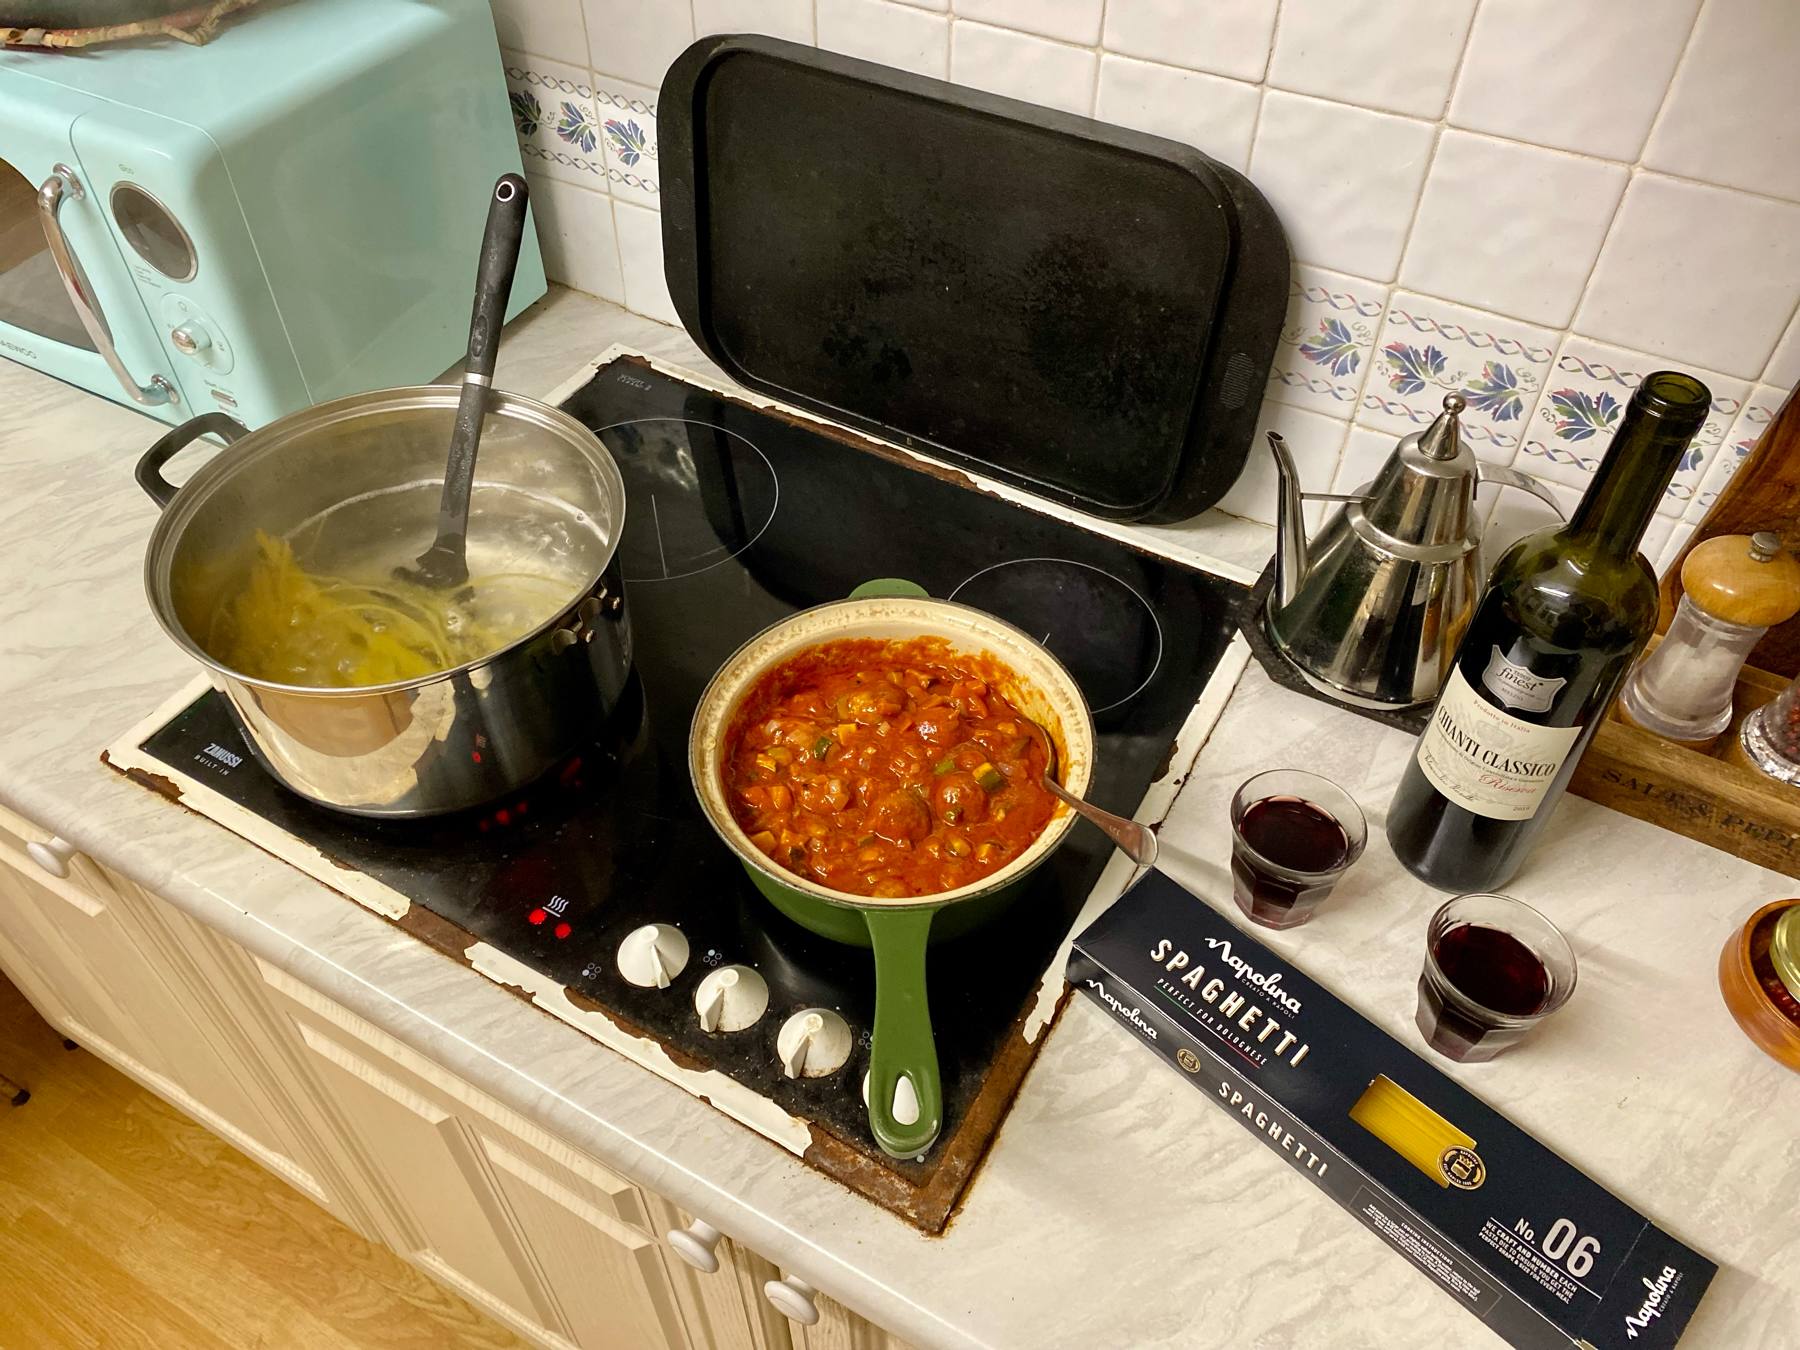 A kitchen countertop with a pot of boiling spaghetti, a pan of tomato sauce with meatballs and vegetables, two glasses of red wine, a wine bottle, a box of spaghetti, and various cooking utensils and condiments.